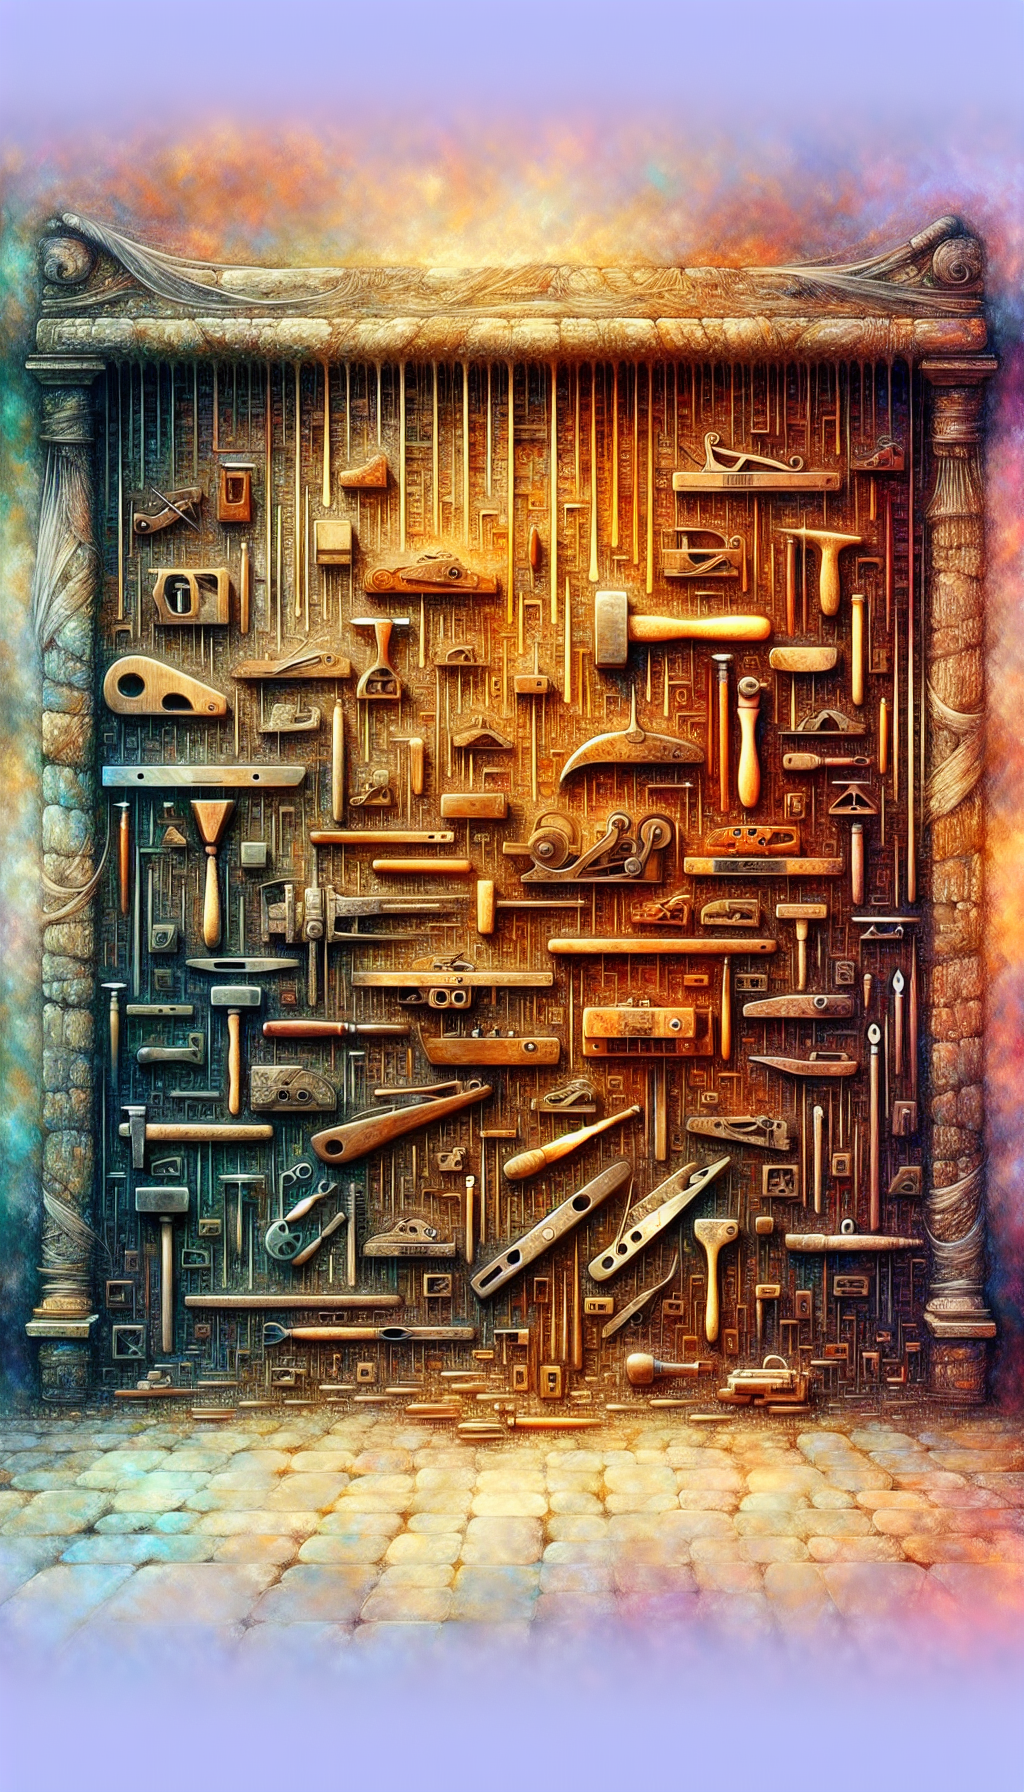 An illustration depicting an ancient wall covered in a tapestry of timelines, where each thread represents a distinct era. At the wall's base, an array of unusual antique hand tools is meticulously sorting themselves into designated epochs, each tool casting a faintly glowing hieroglyph revealing its age and origin. The tools vary in opacity, signifying different styles from ethereal watercolors to crisp digital lines.